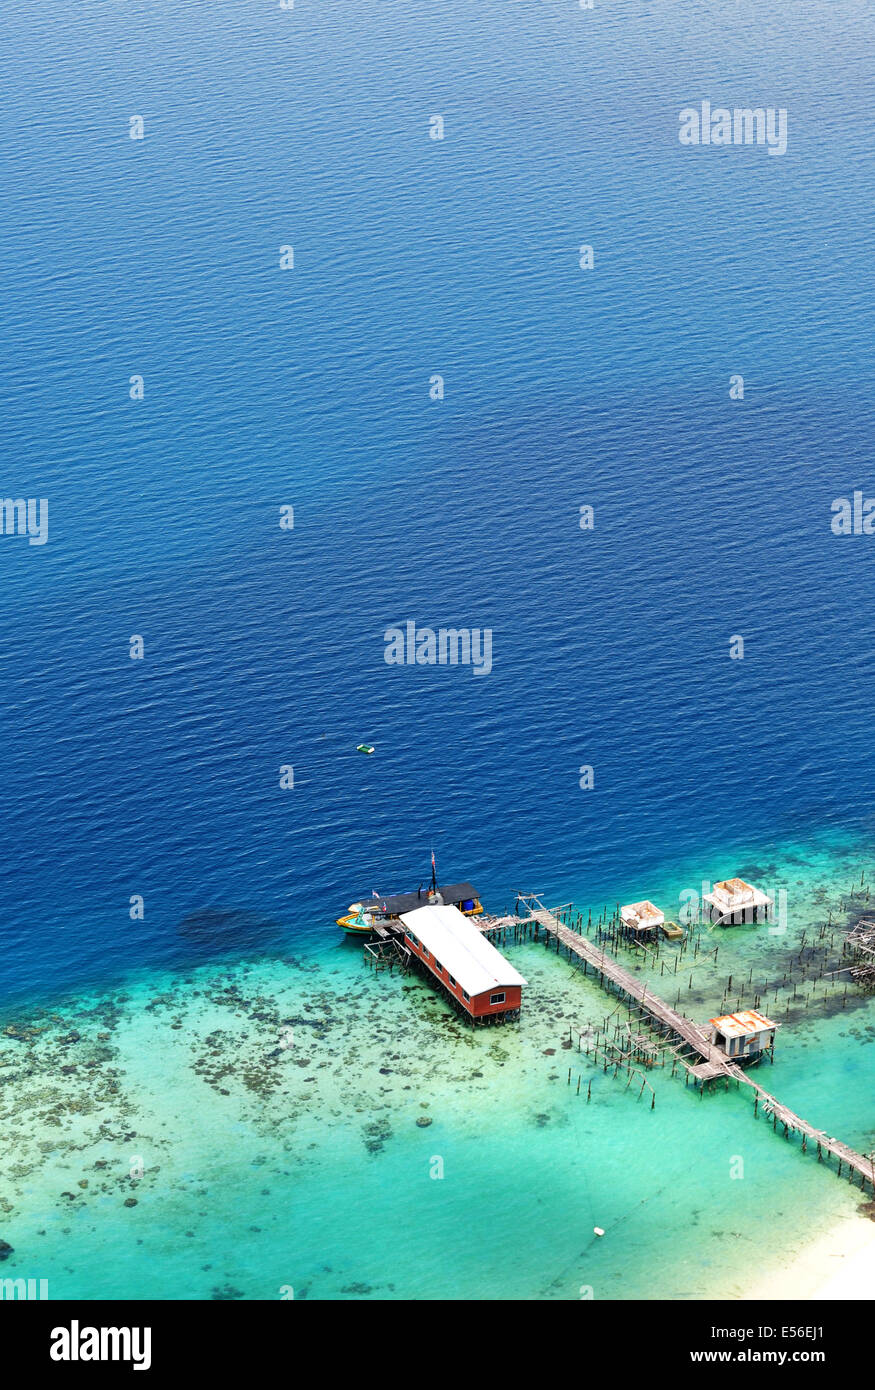 Scenic aerial view of an ocean with jetty and coral, Tun Sakaran Dandai Marine park, Sabah Borneo Stock Photo